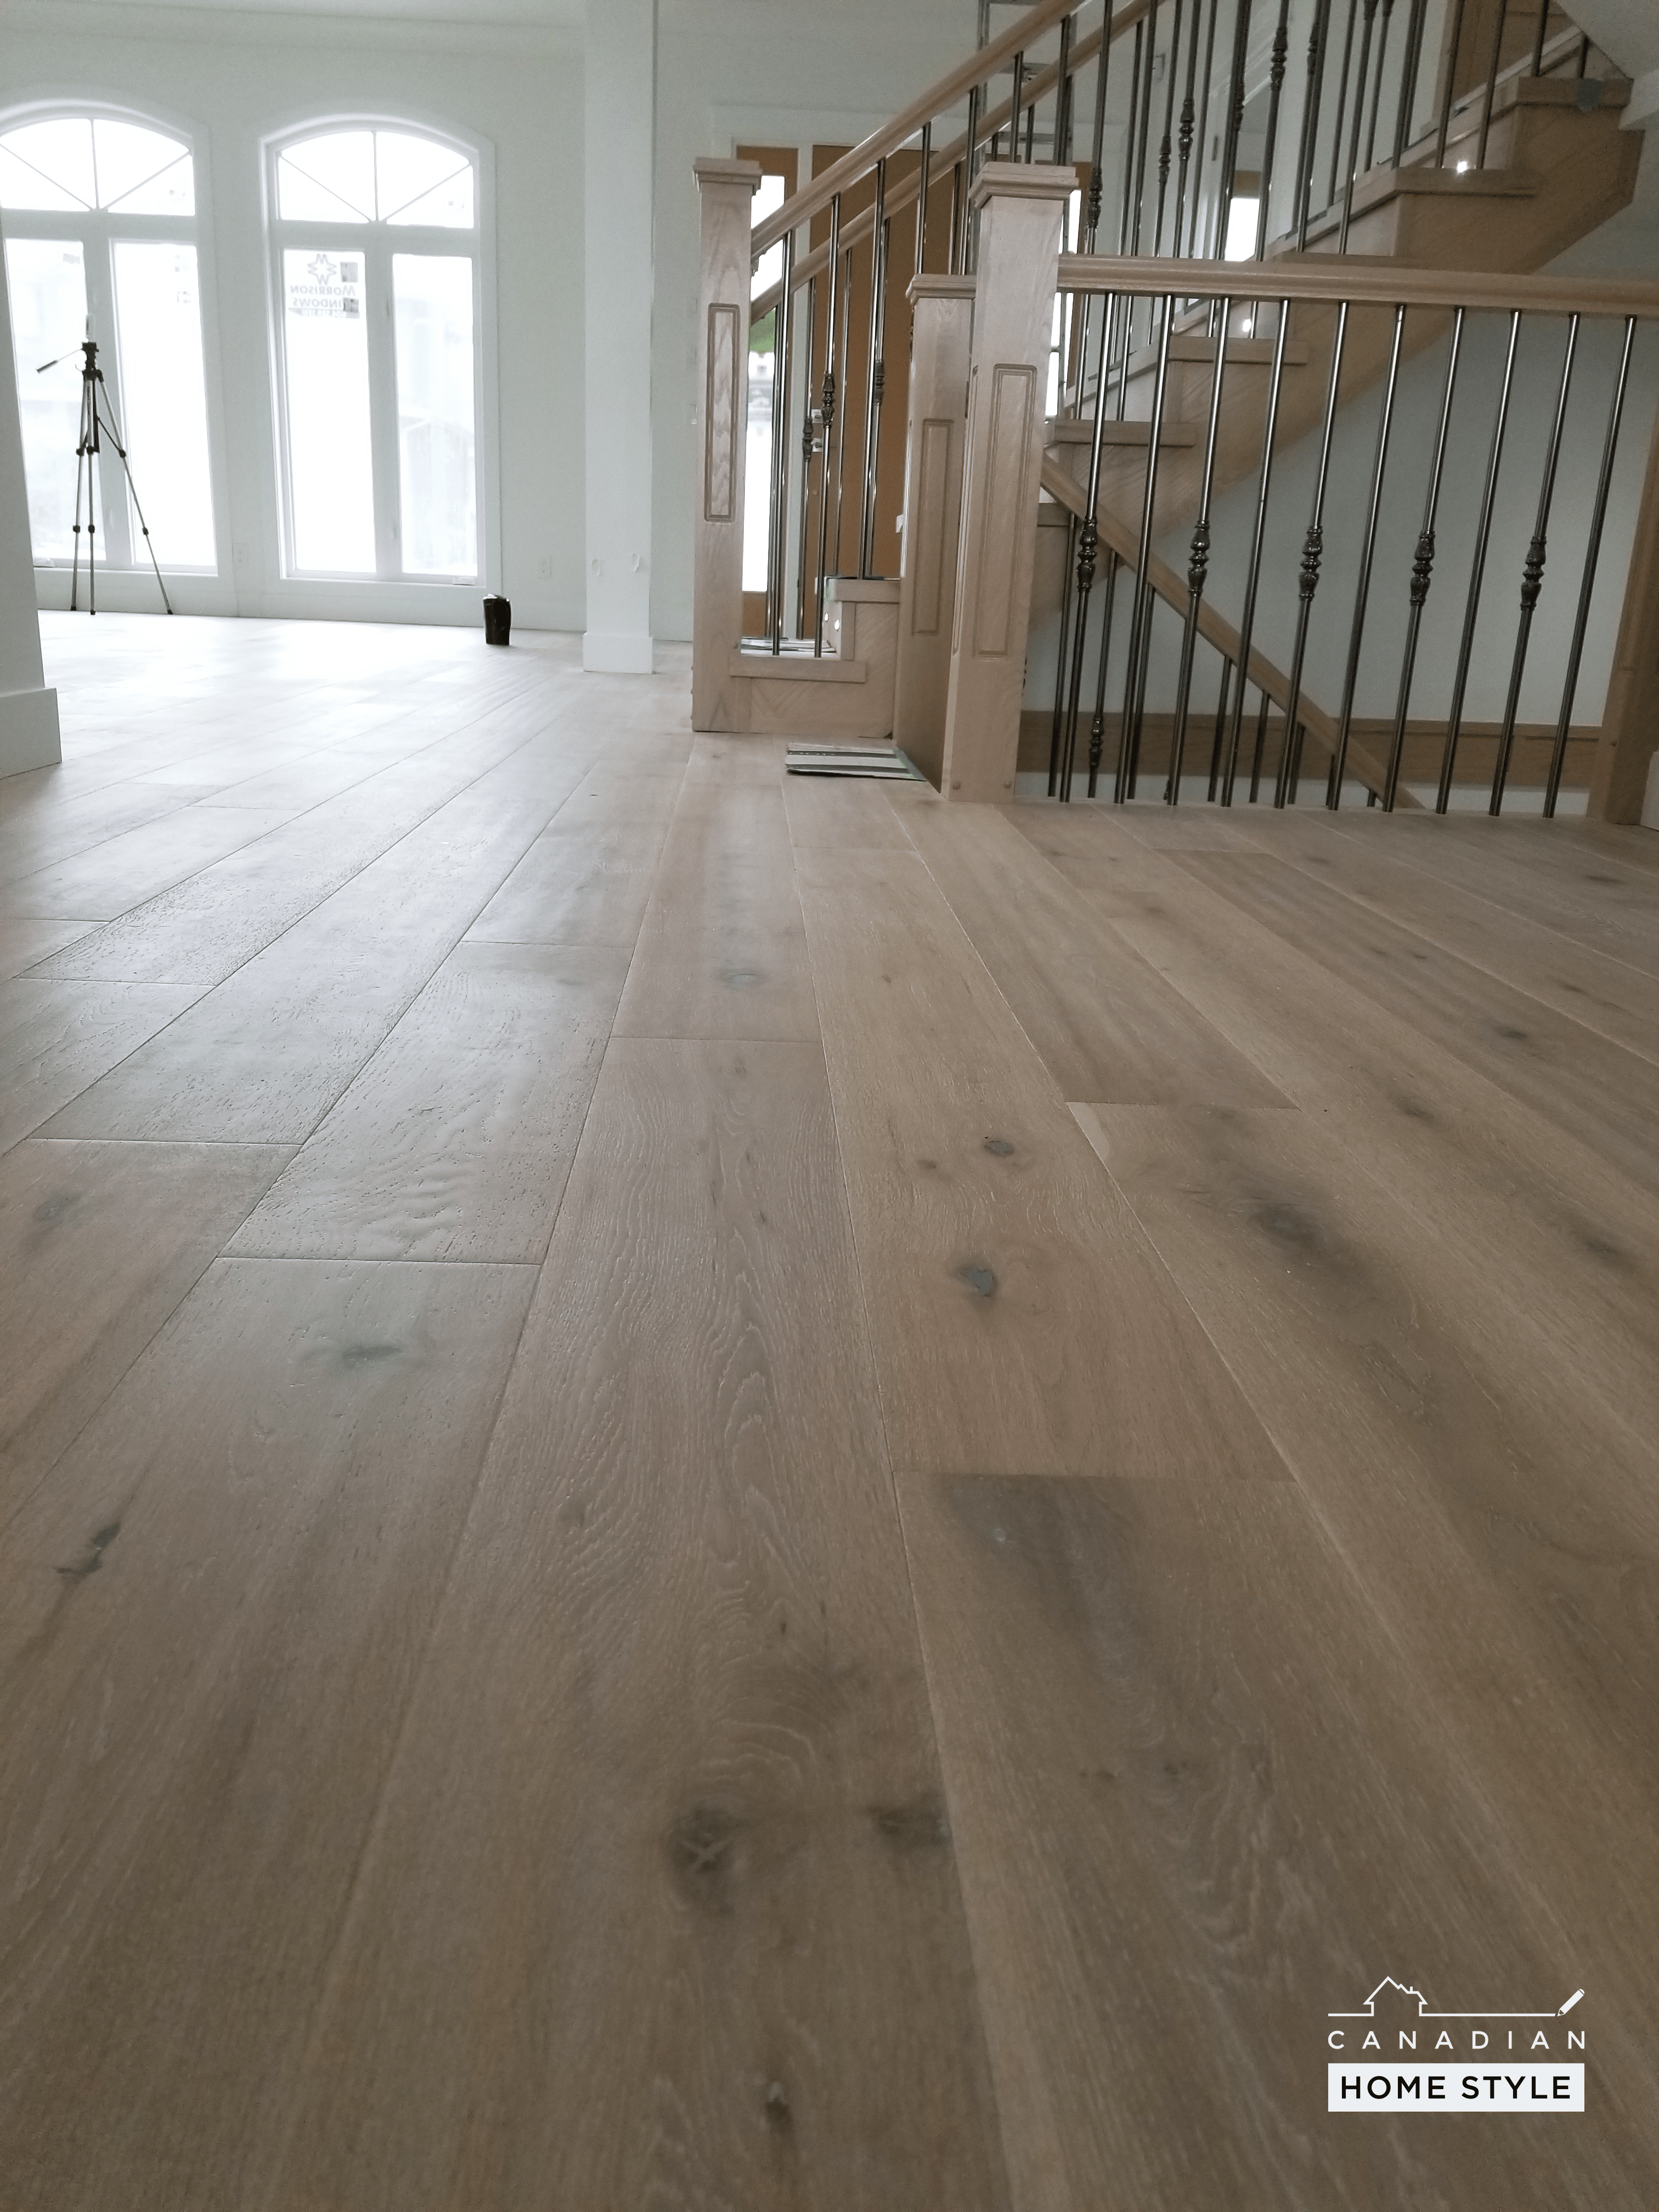  Easy-to-maintain wood floors in Vancouver homes